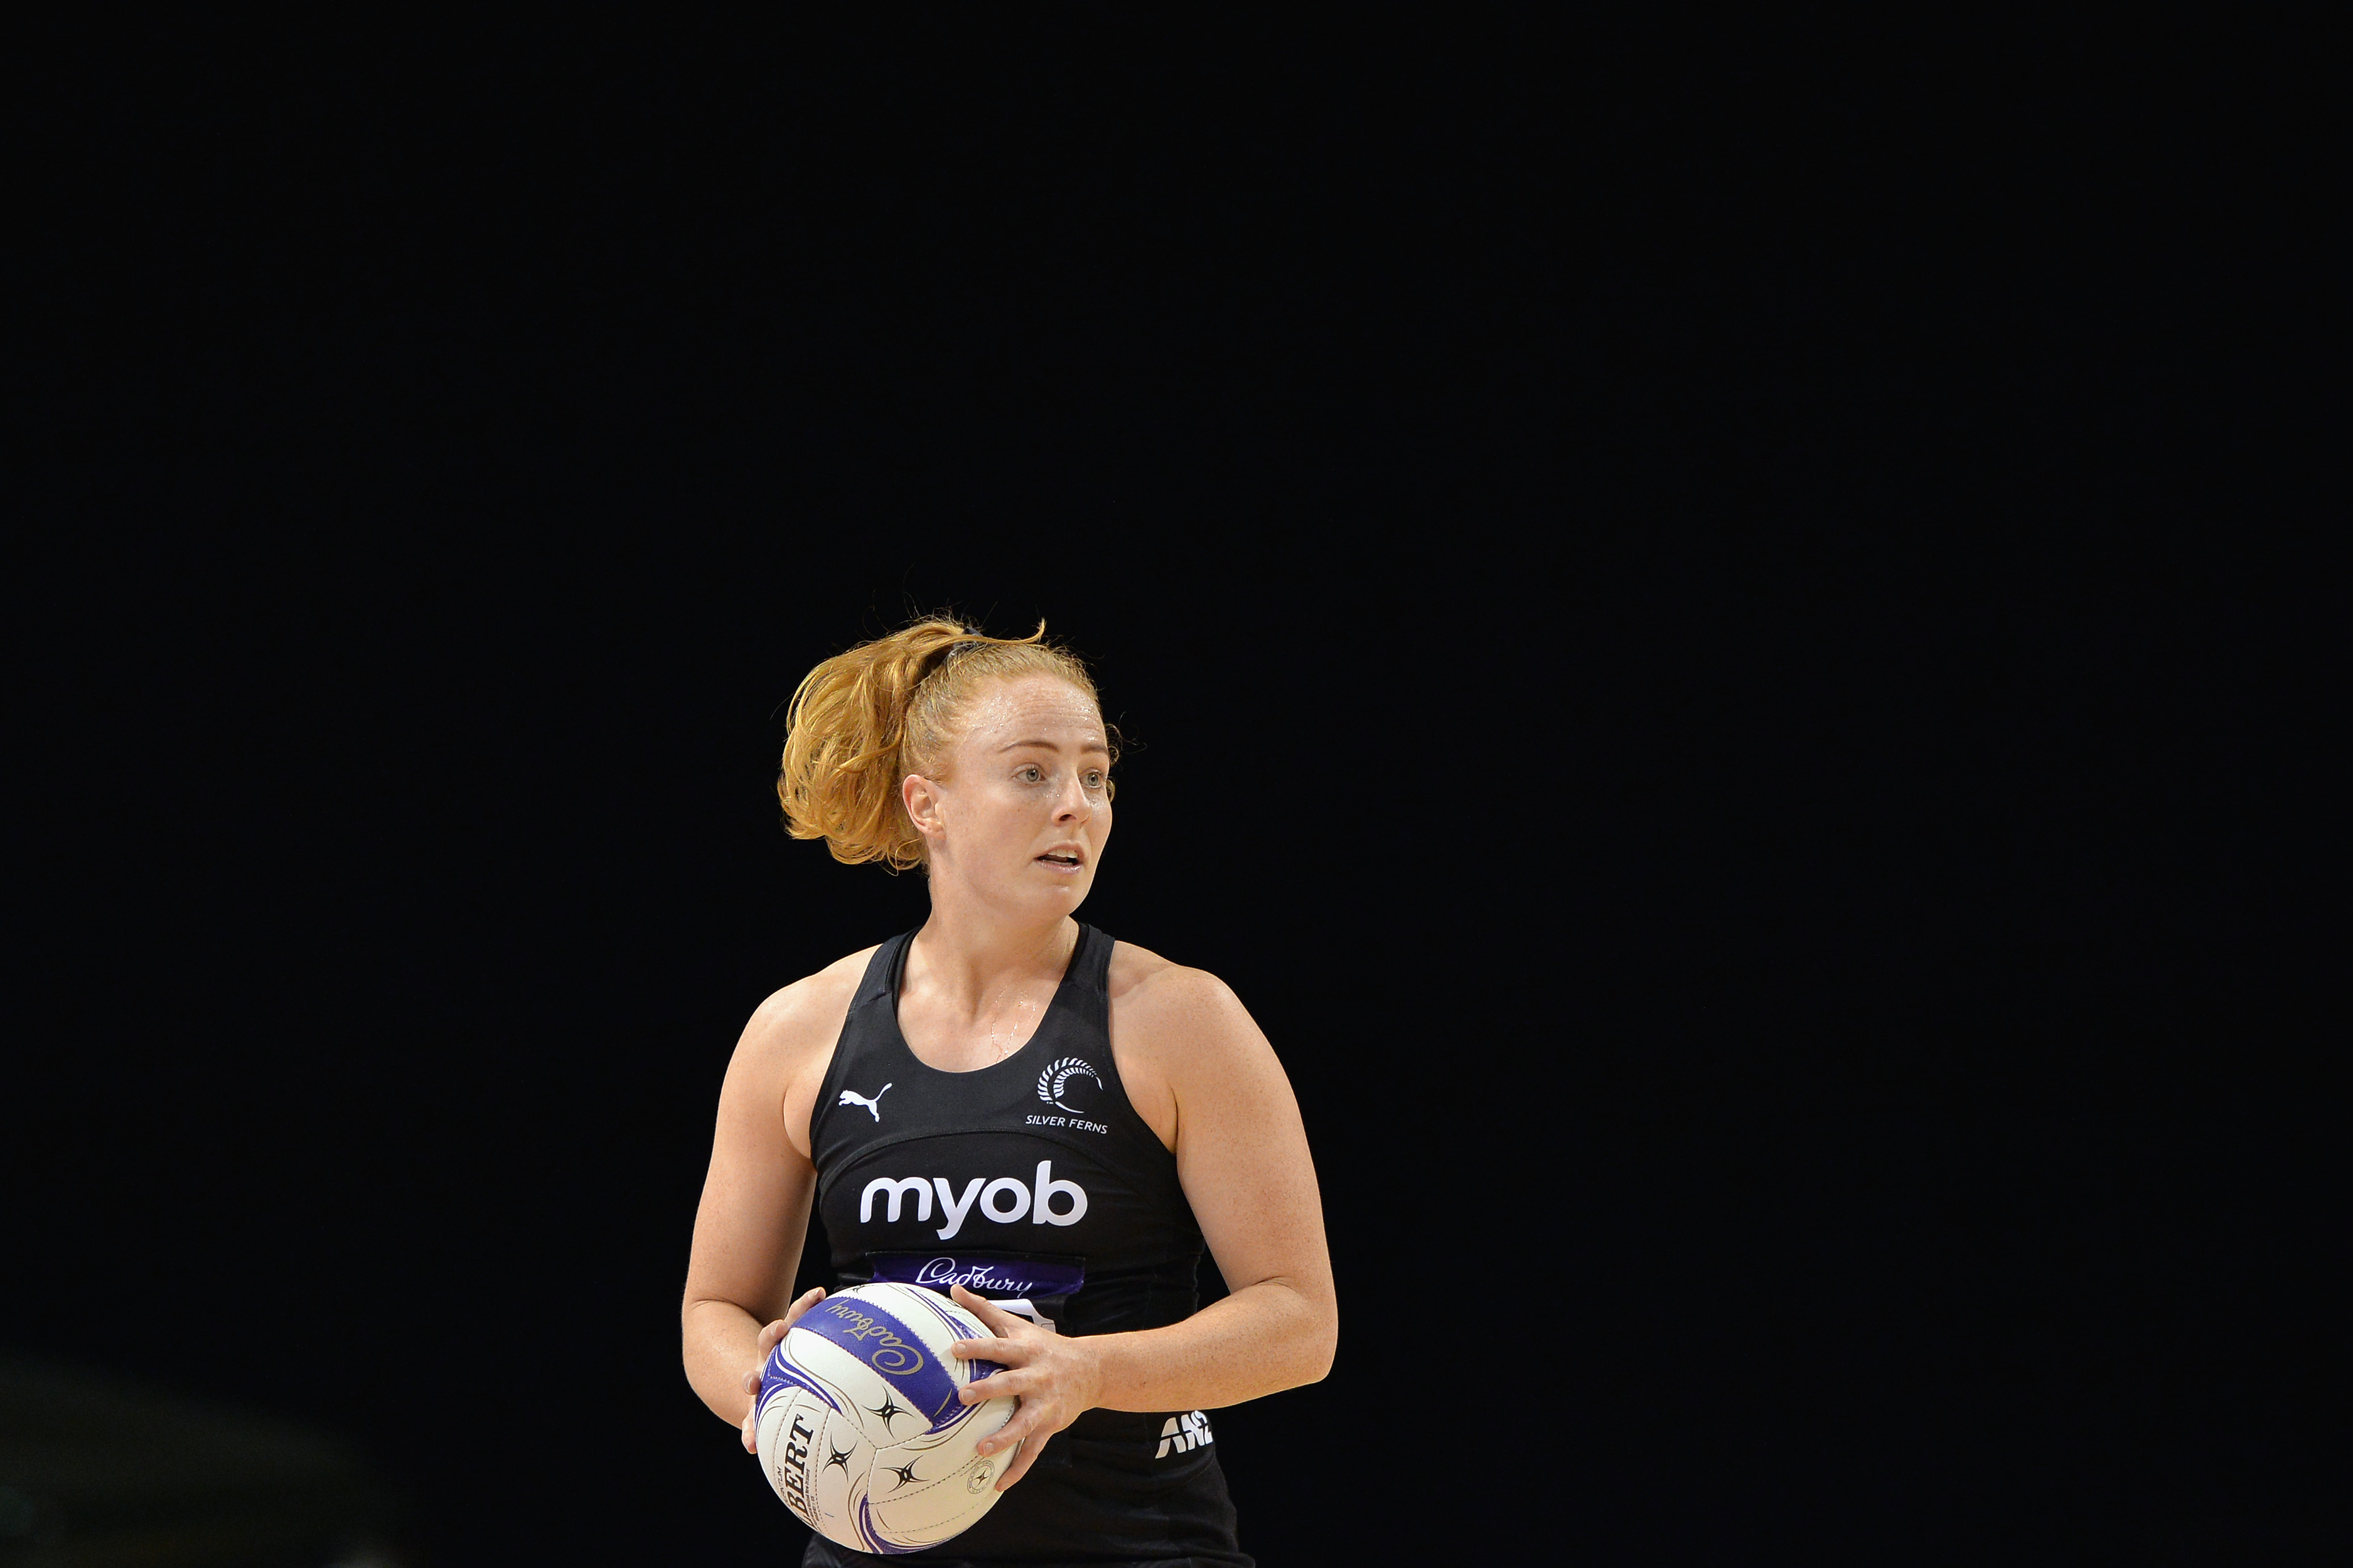 Winders will be unavailable for Silver Ferns selection this year.